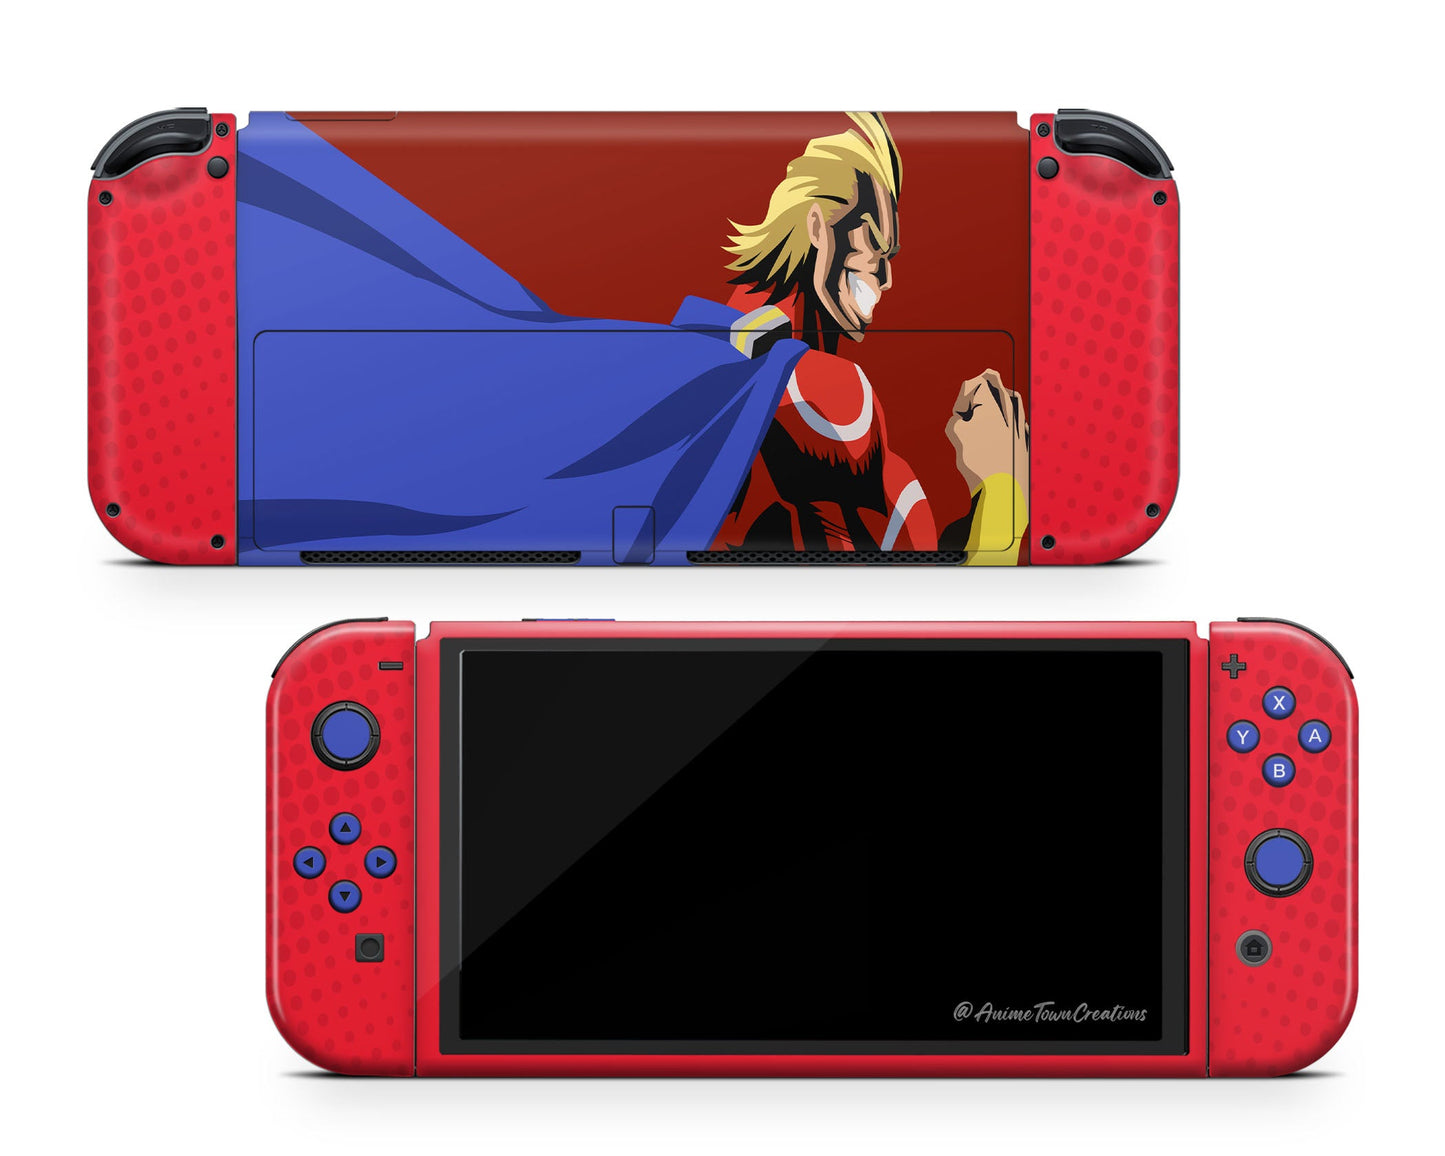 Anime Town Creations Nintendo Switch OLED My Hero Academia All Might Vinyl +Tempered Glass Skins - Anime My Hero Academia Switch OLED Skin